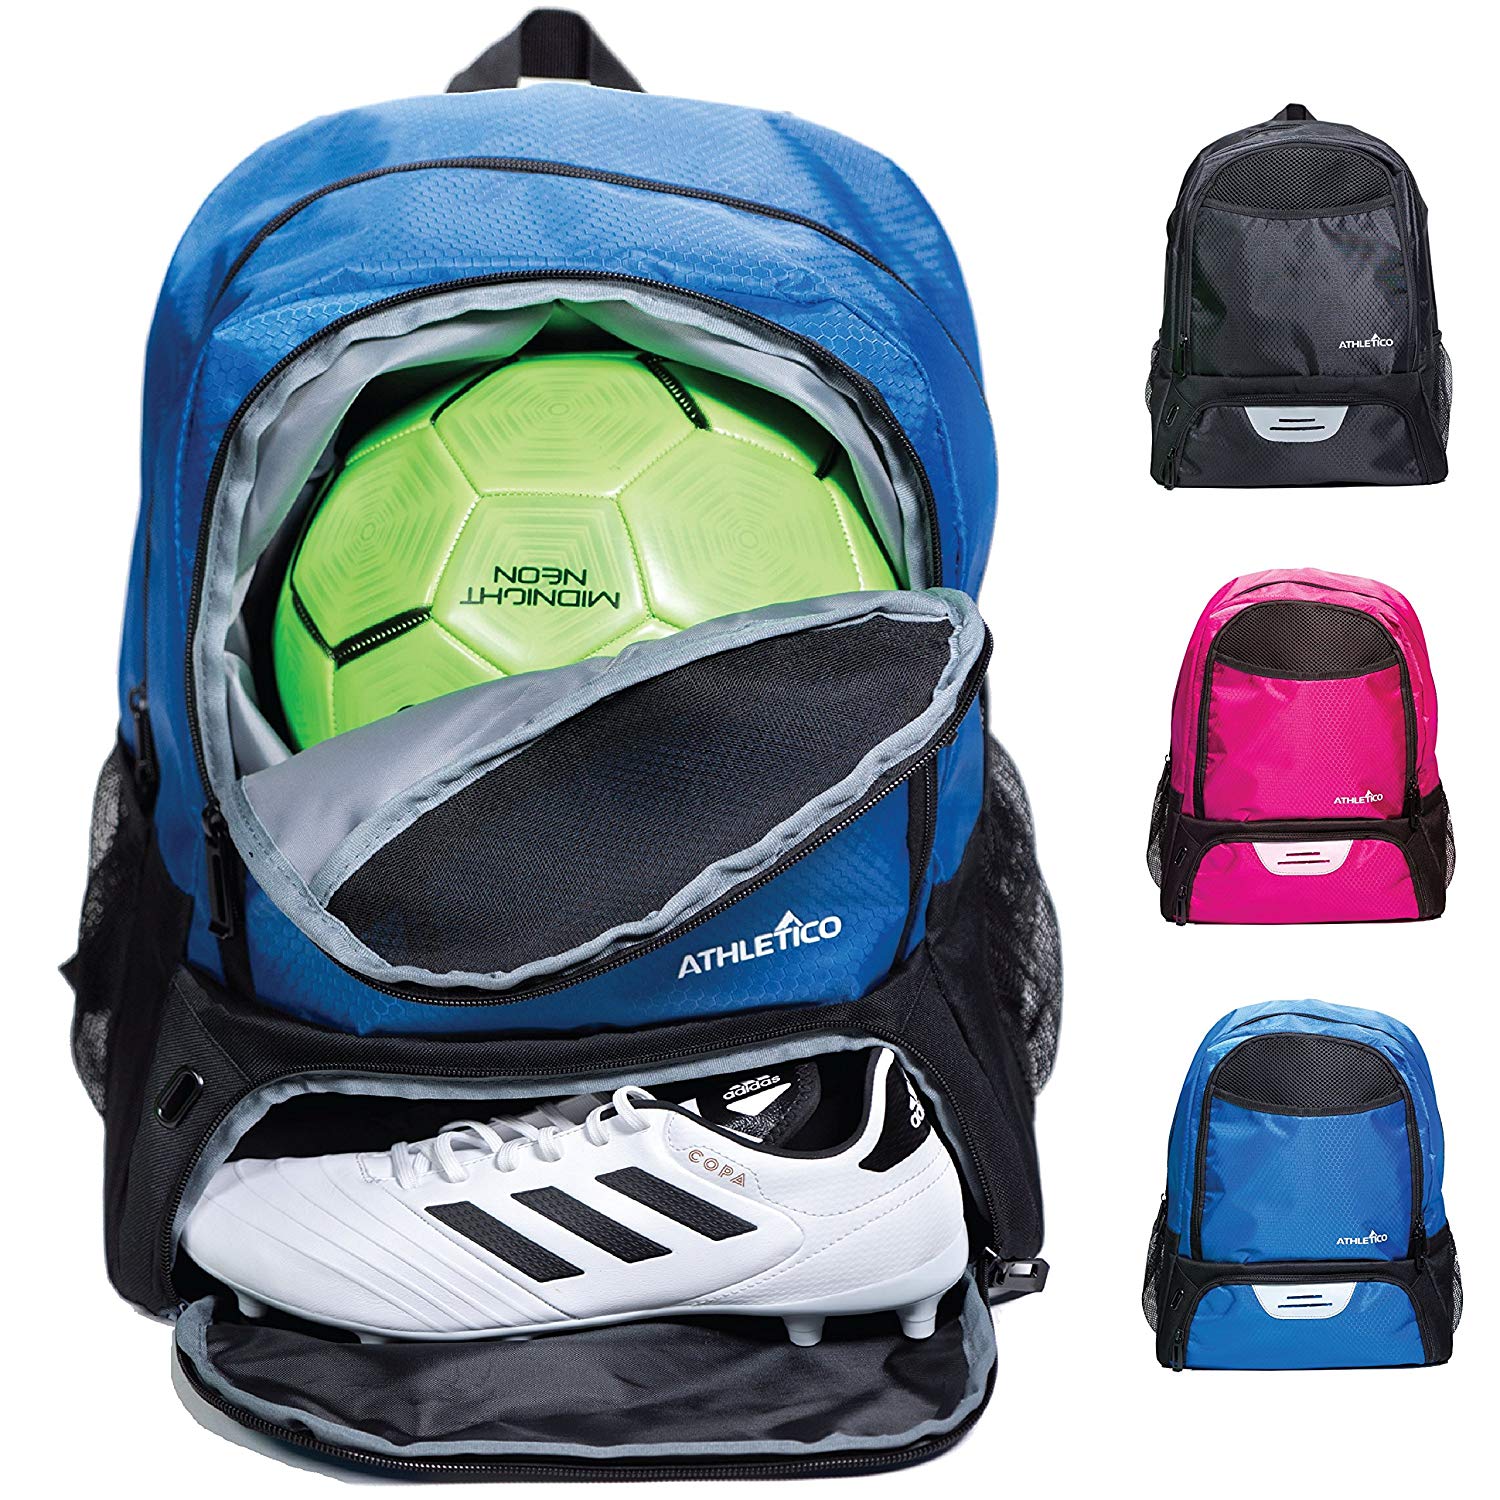 Athletico youth soccer bag